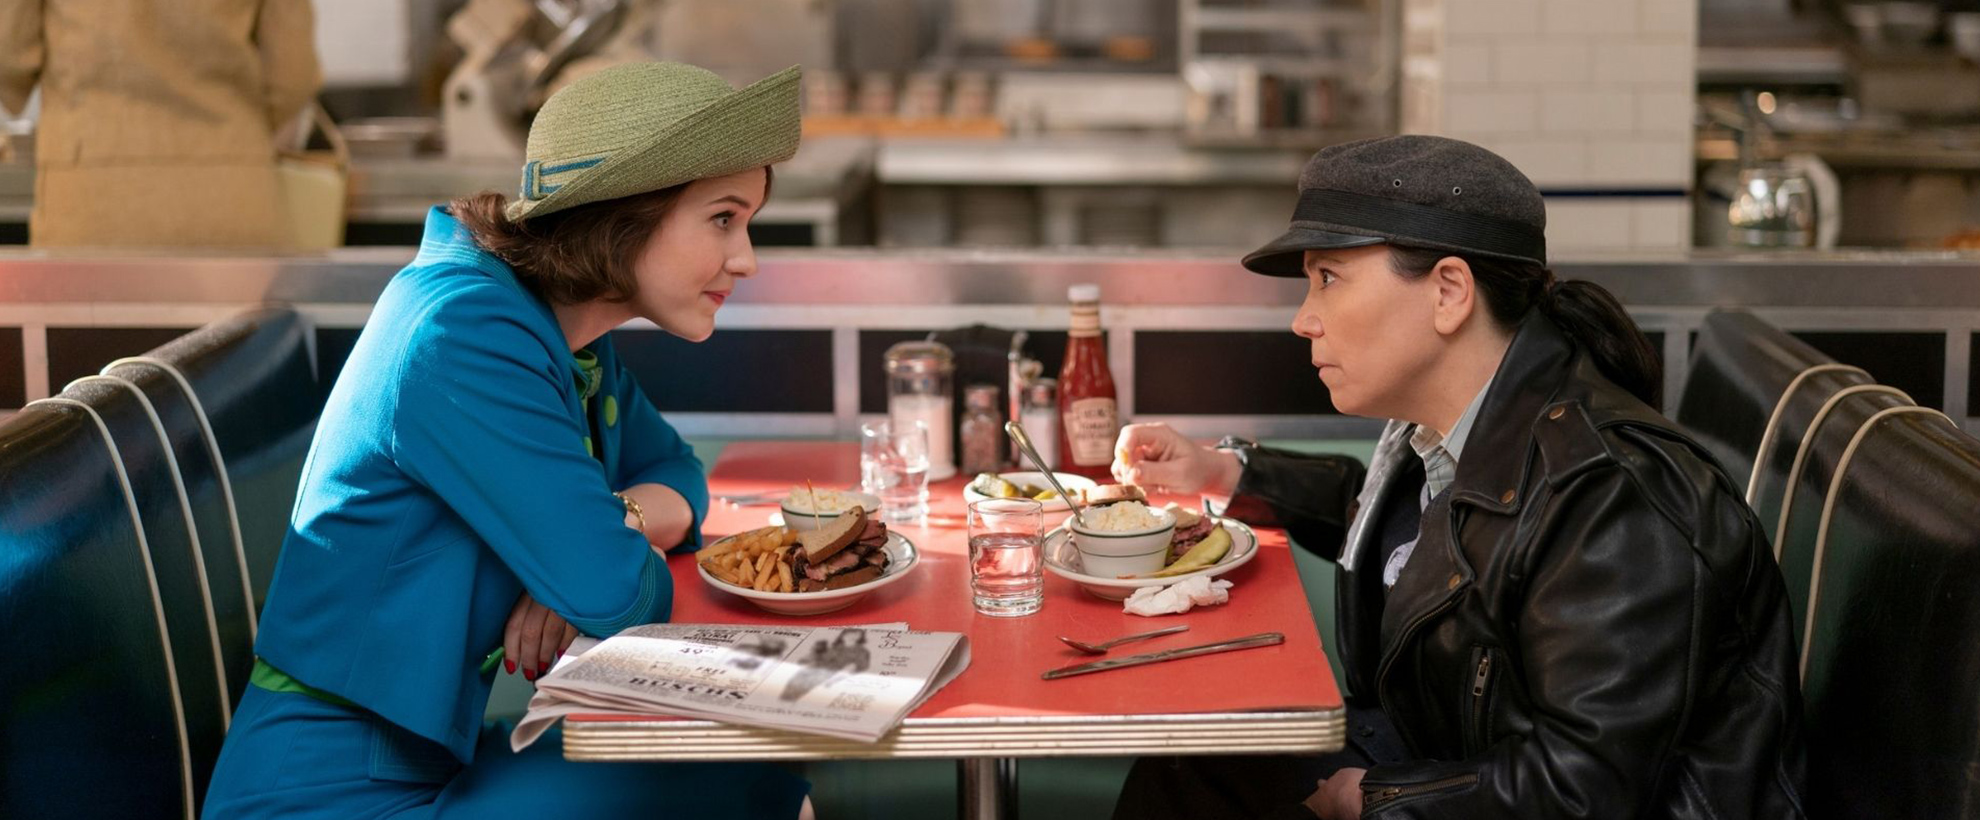 Mrs Maisel sits at a diner table, leaning over to speak with a person in a black leather jacket